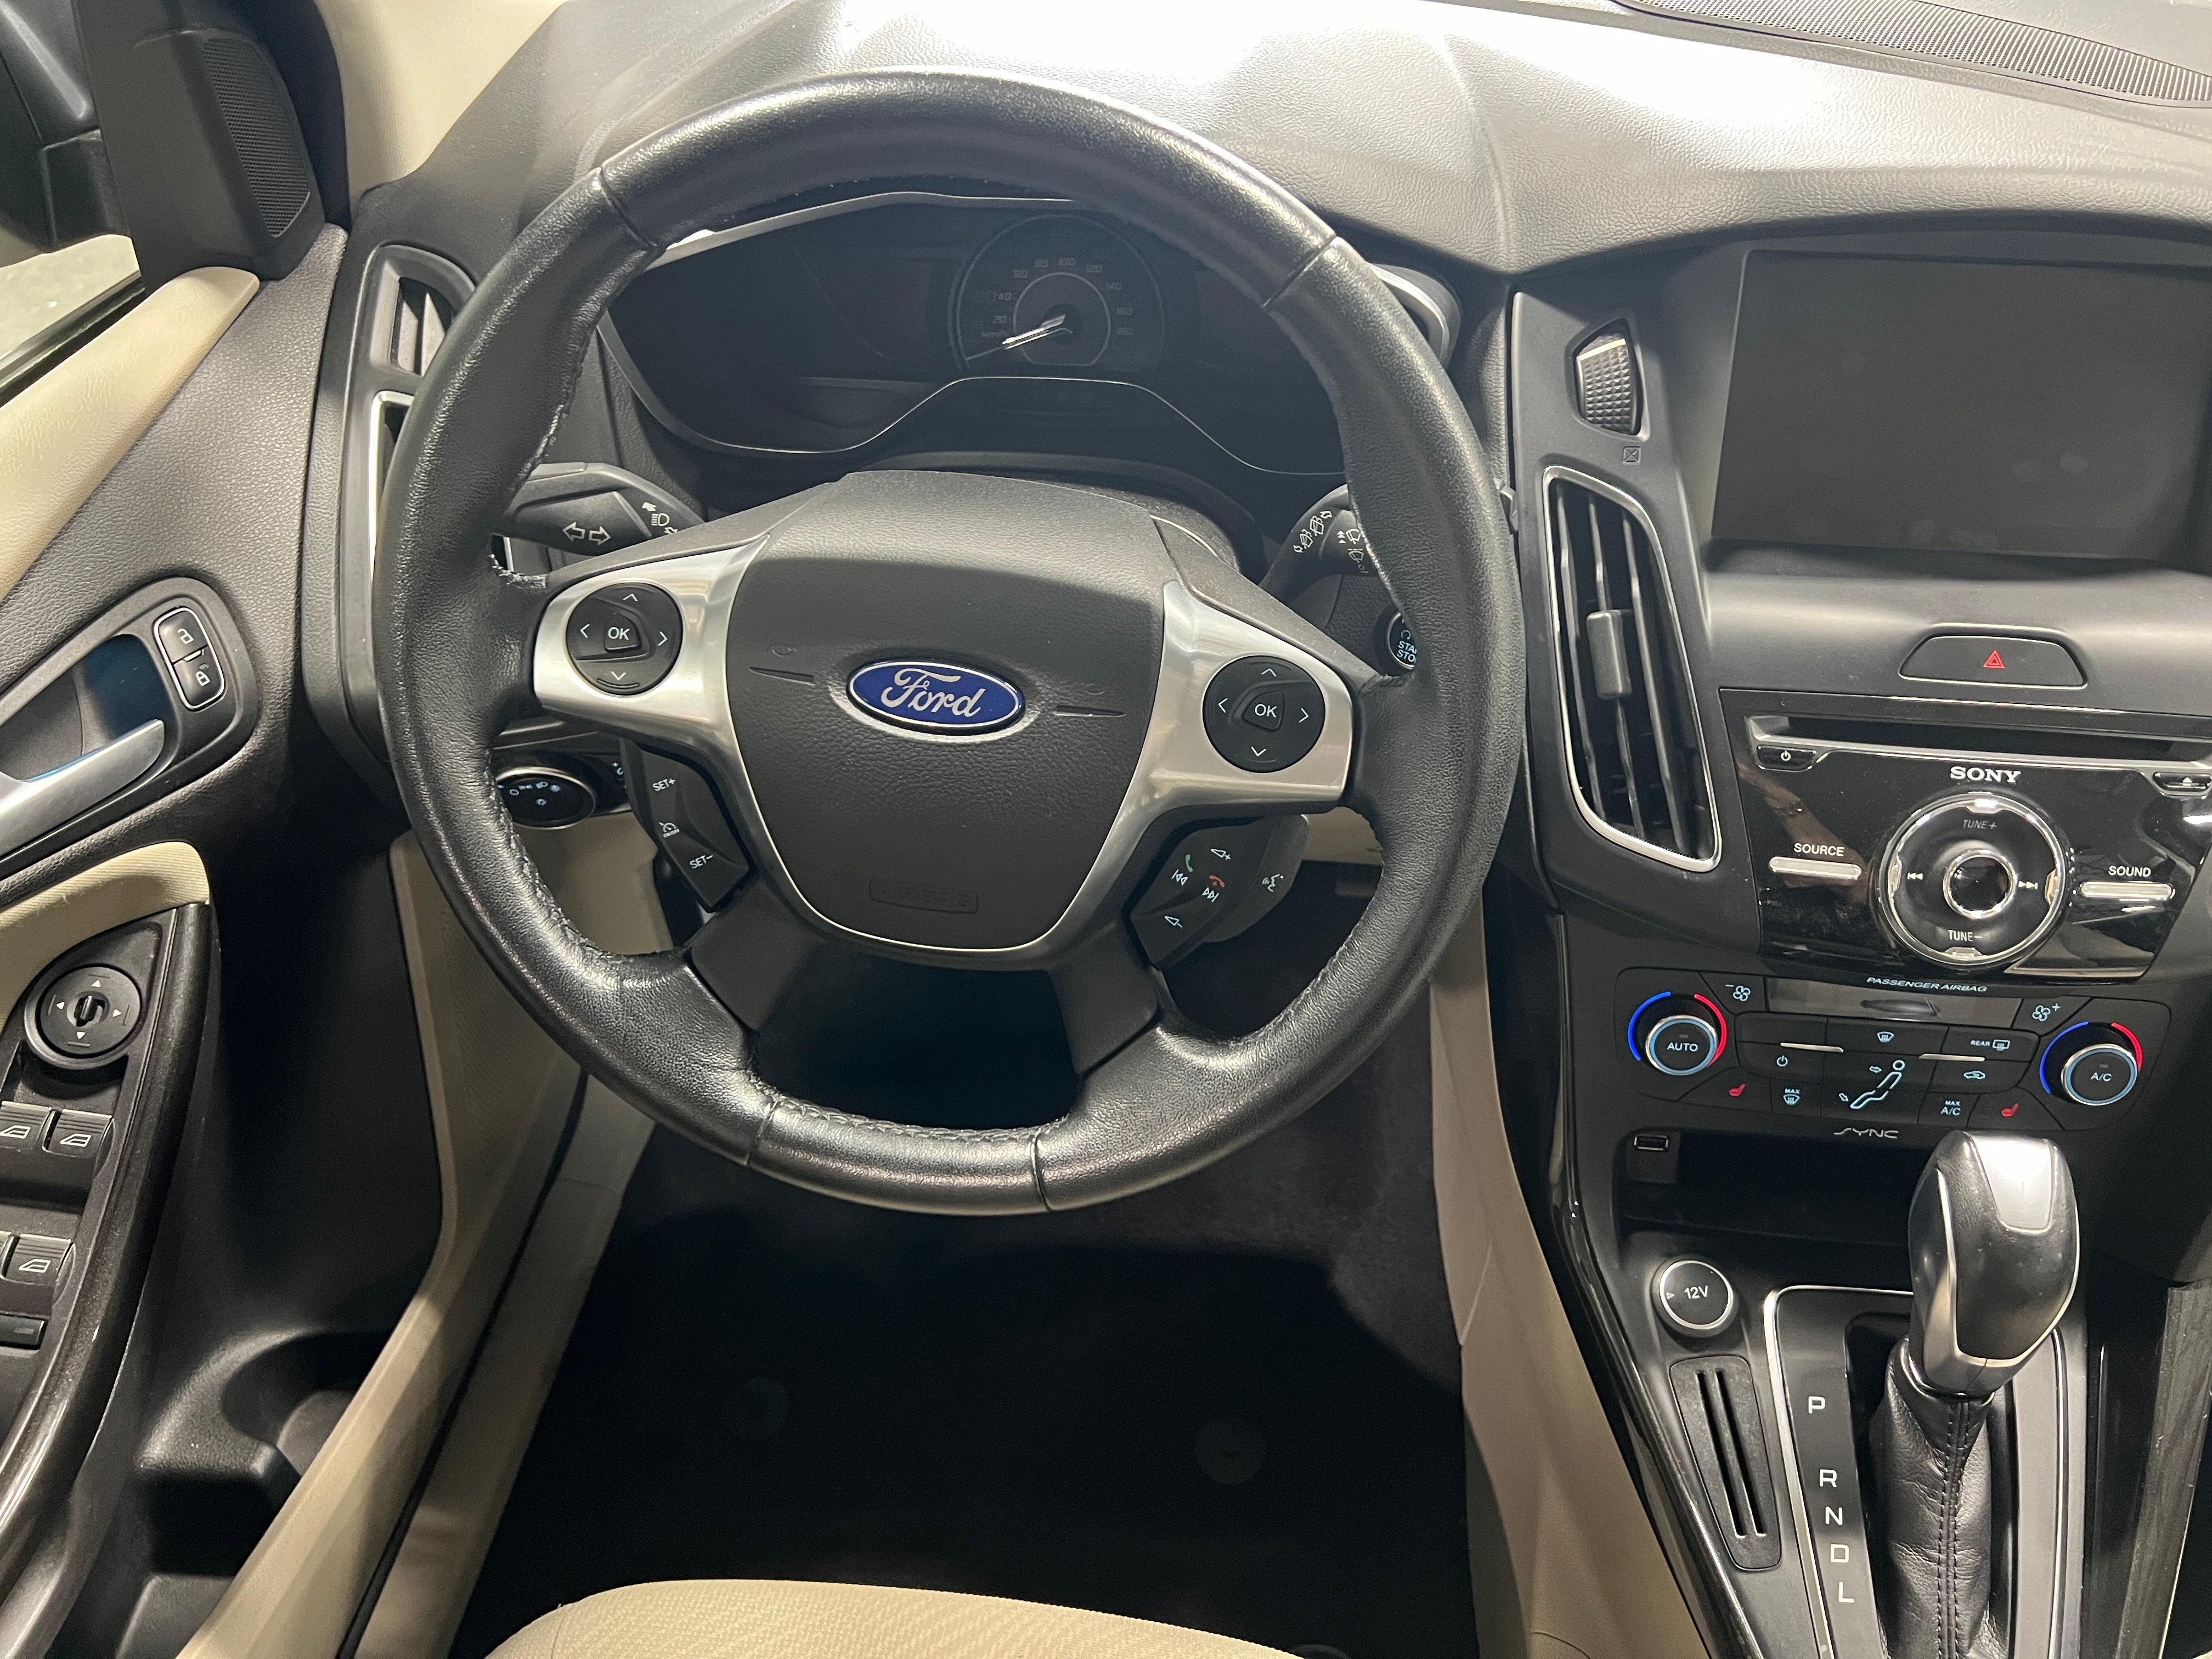 Used 2015 Ford Focus Electric with VIN 1FADP3R43FL276657 for sale in Auburn, WA